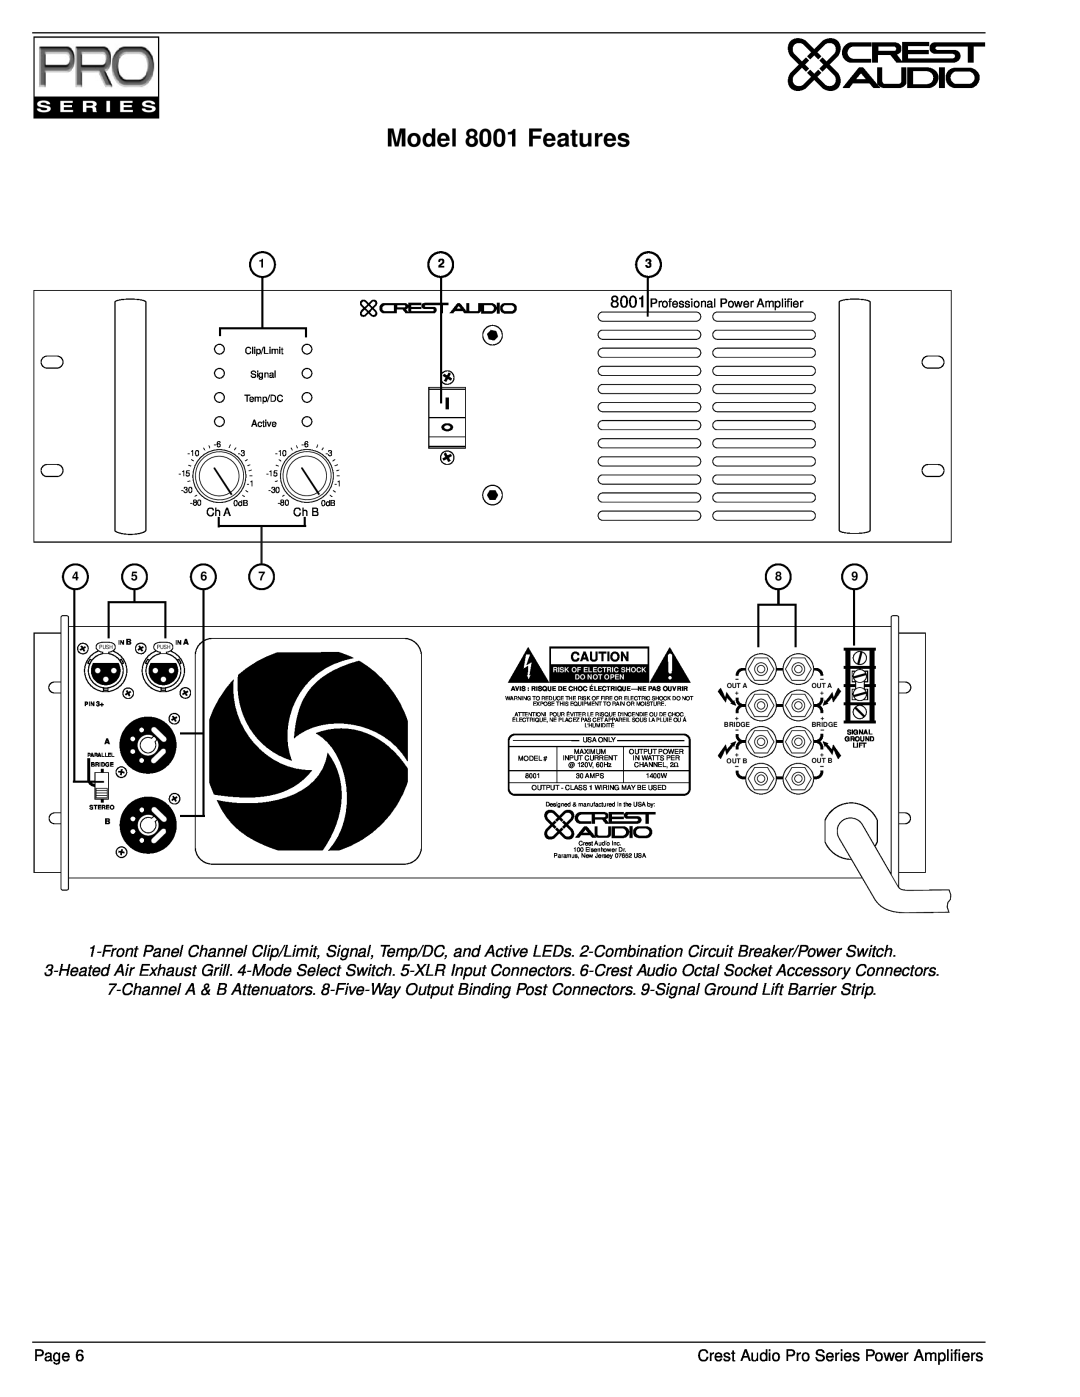 Crest Audio Stereo Amplifier owner manual Model 8001 Features, Page 